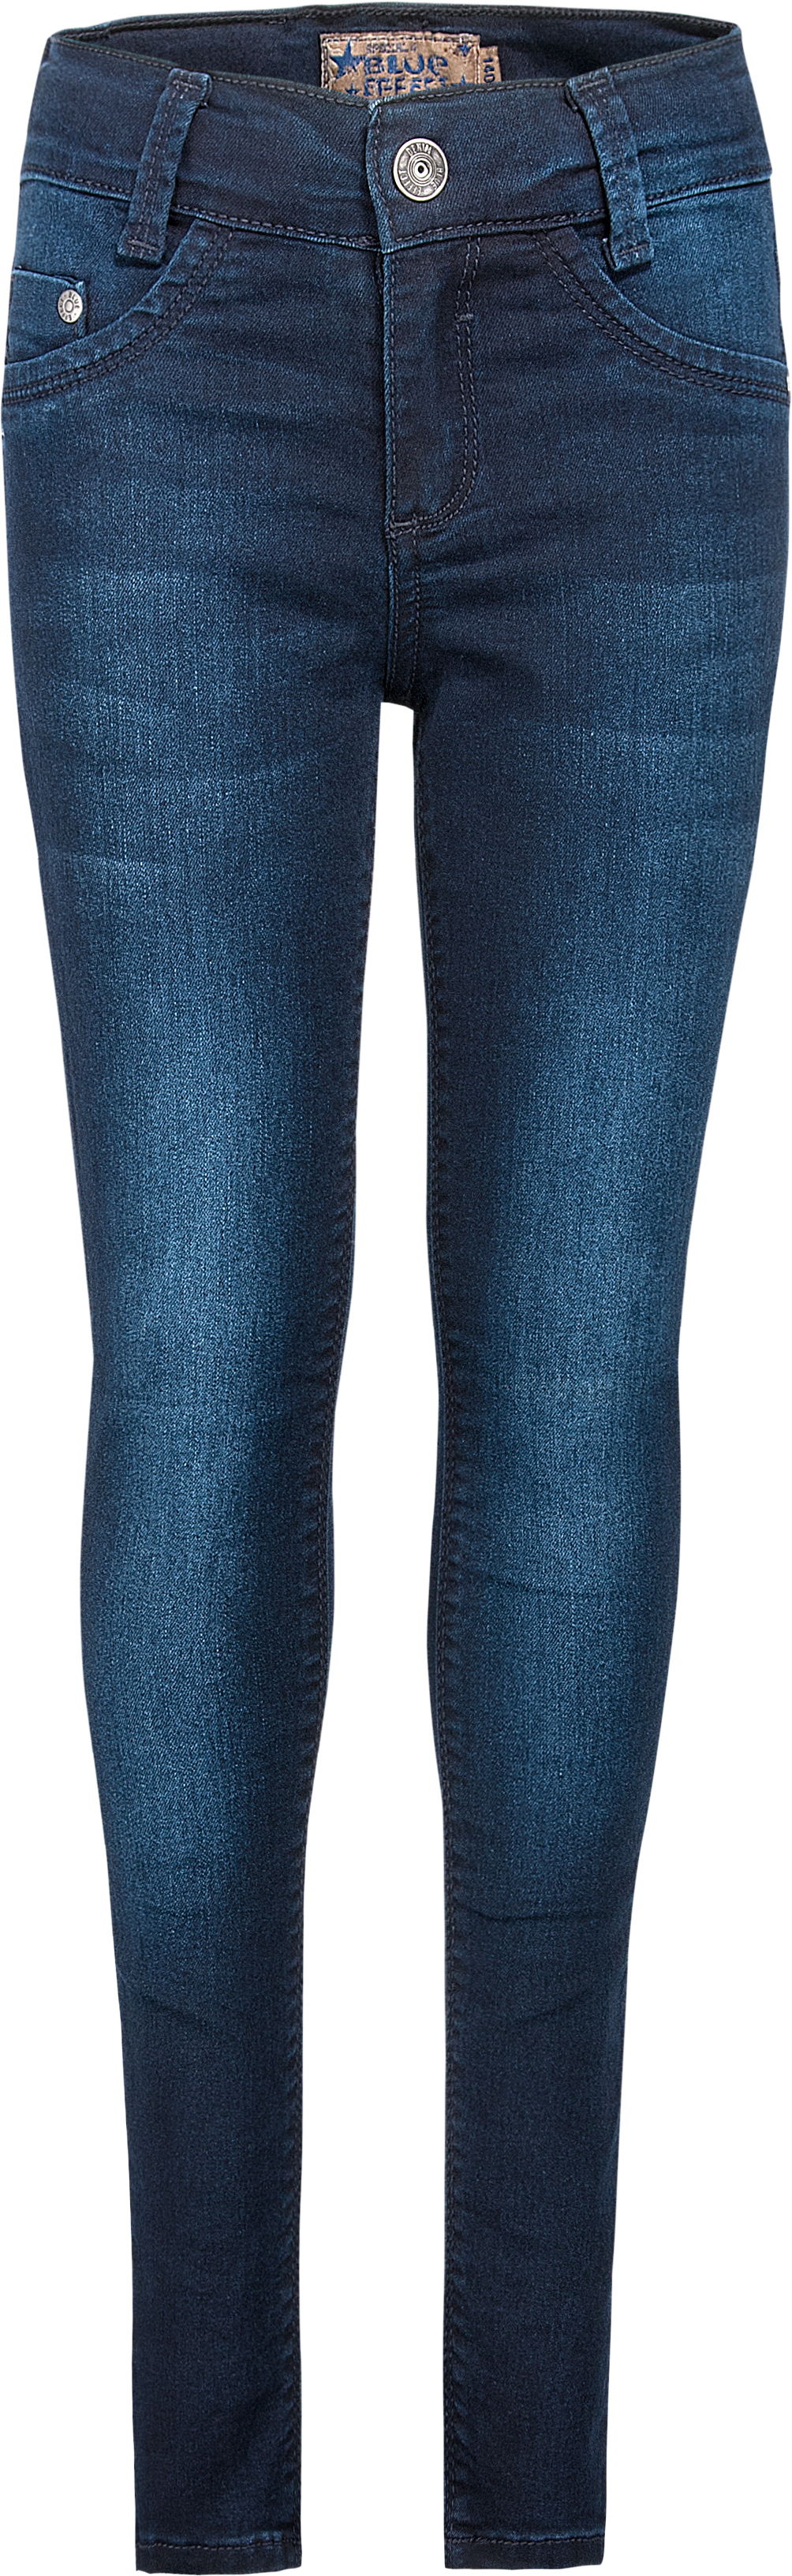 0144-NOS Girls Jeans Jegging Special-4, Skinny, available in Slim, Normal, Wide